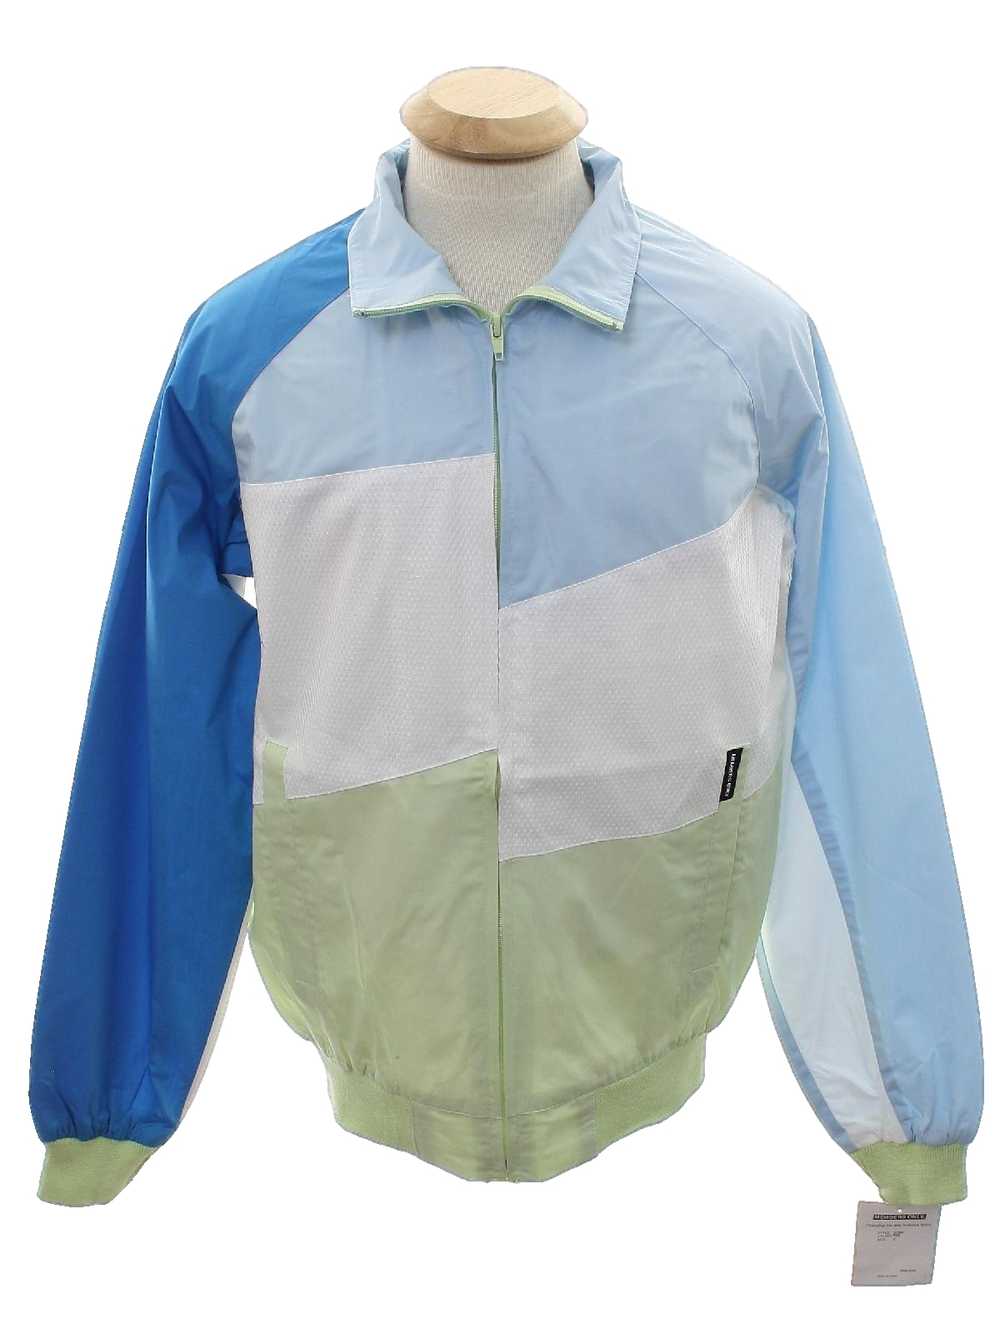 1980's Members Only Mens Members Only Jacket - image 1